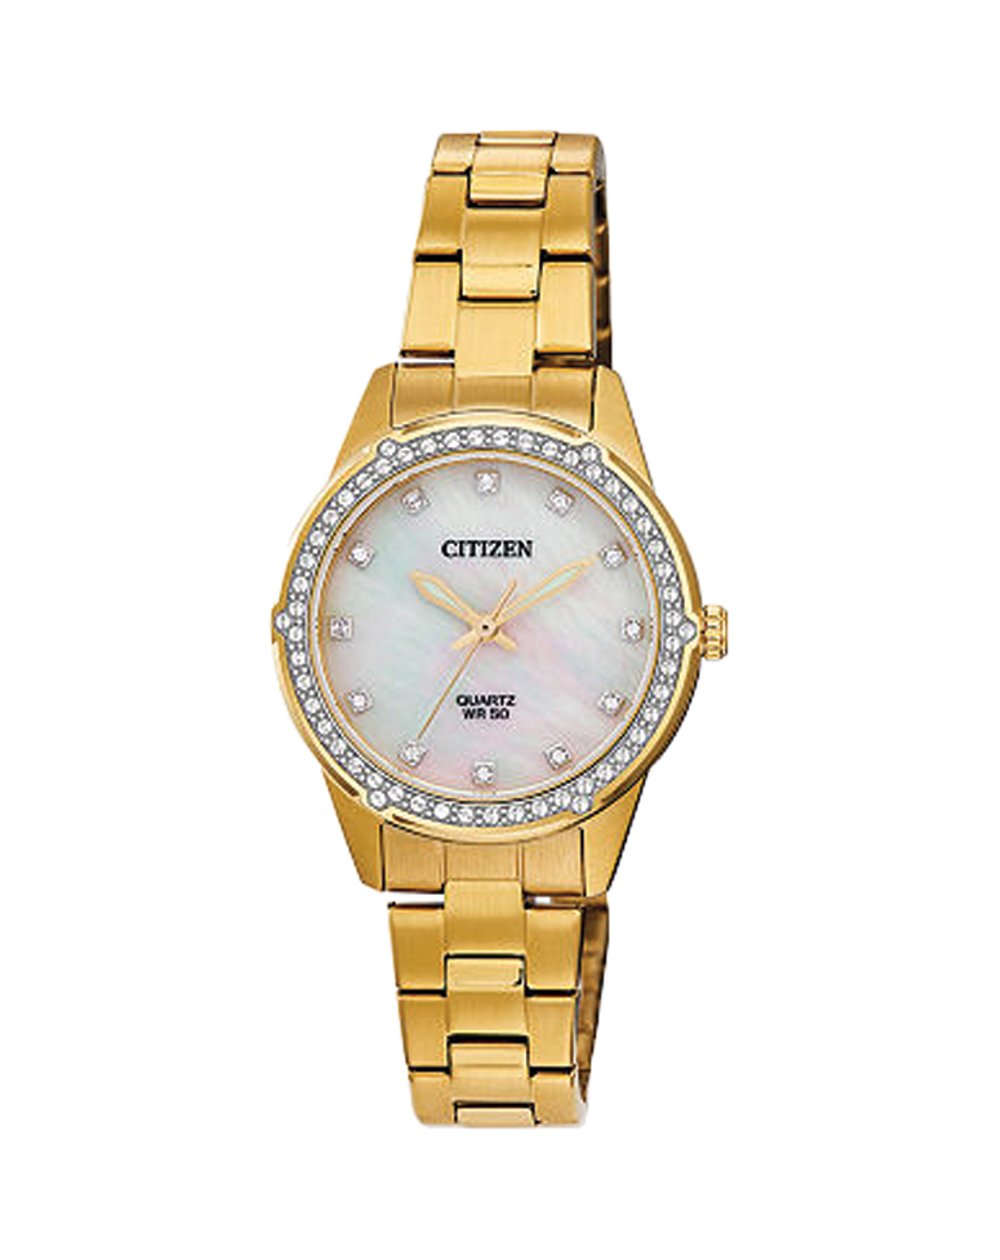 Spectacular in appearance and masterfully crafted, this watch is the embodiment of style. Punctuated by a gold tone case with elegant mother of pearl dial, the bezel is resplendent with sparkling crystal elements. Offering sophisticated beauty for women looking for something special and versatile enough to be worn daily. With quartz reliability, style and beauty have never been so accessible.